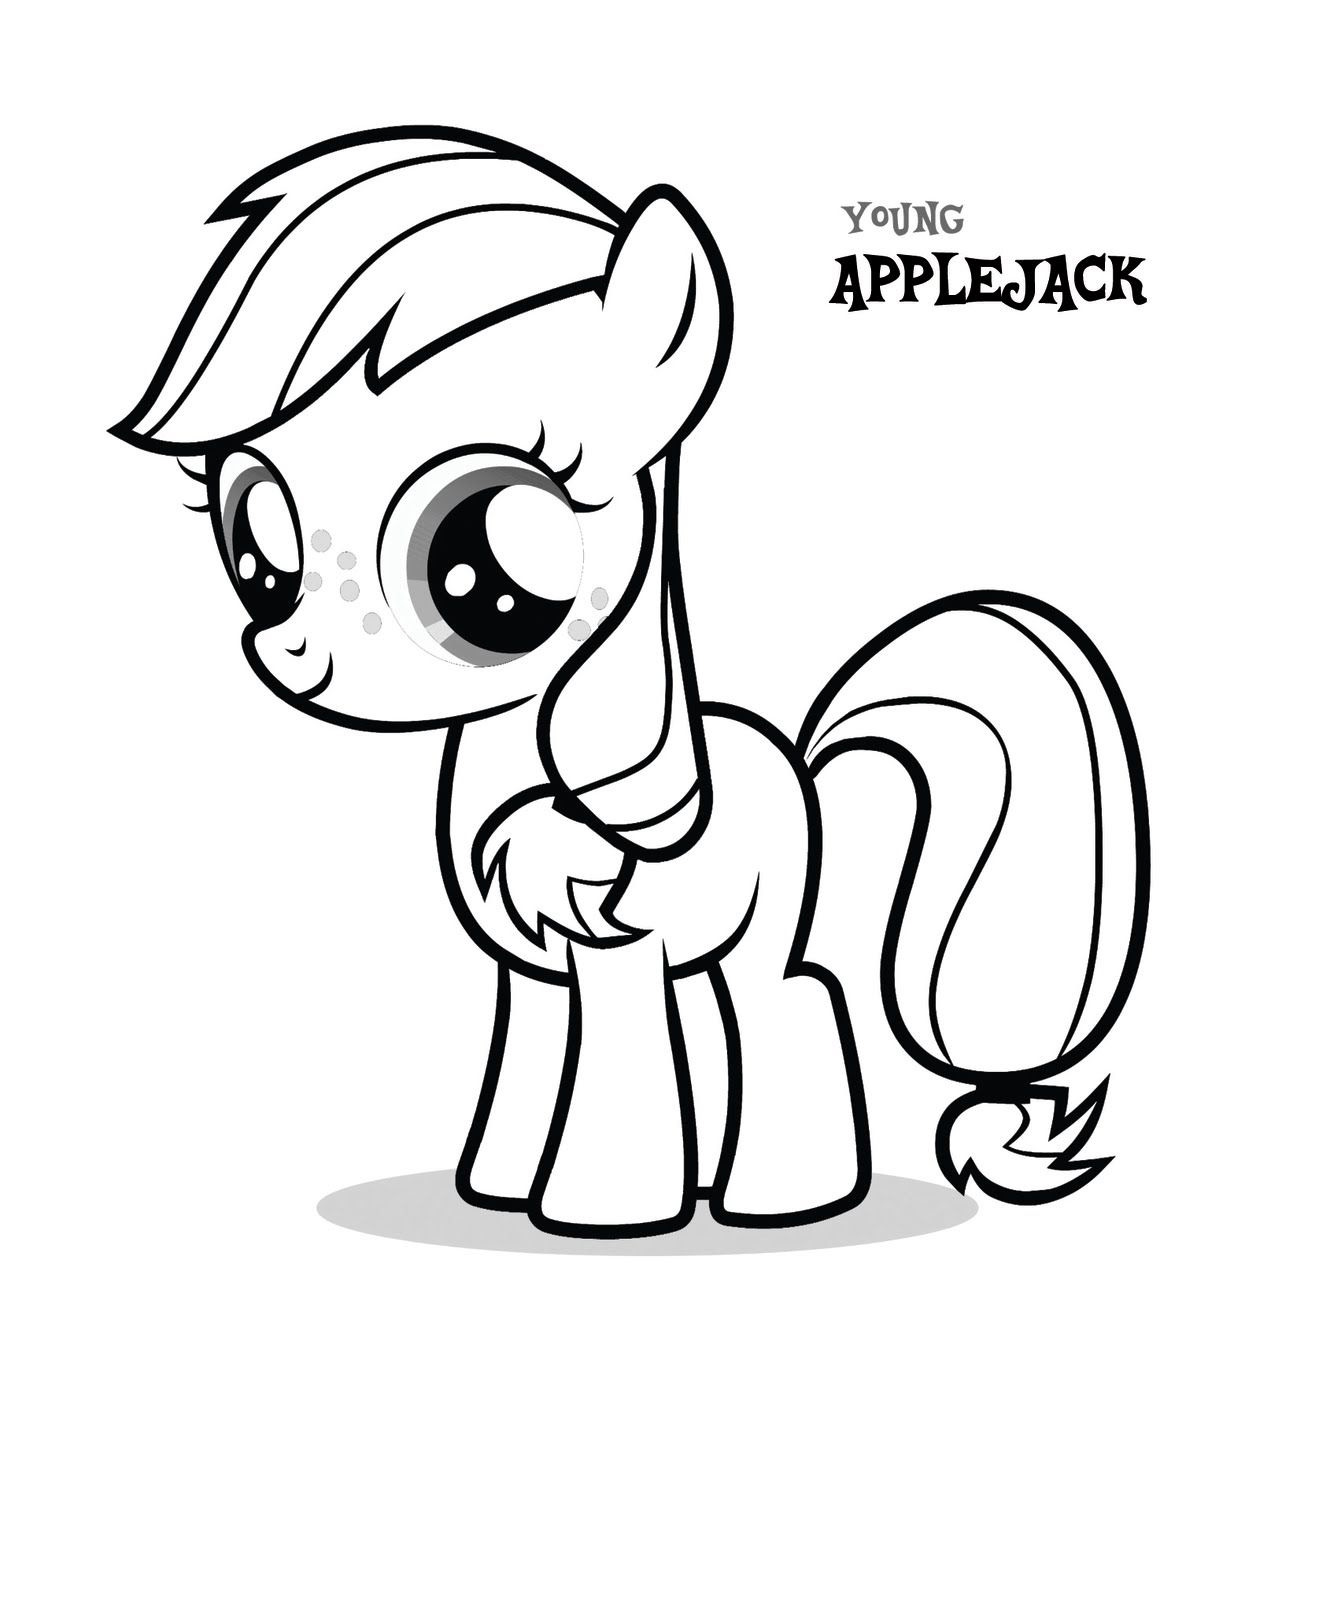 Applejack Coloring Pages   Best Coloring Pages For Kids